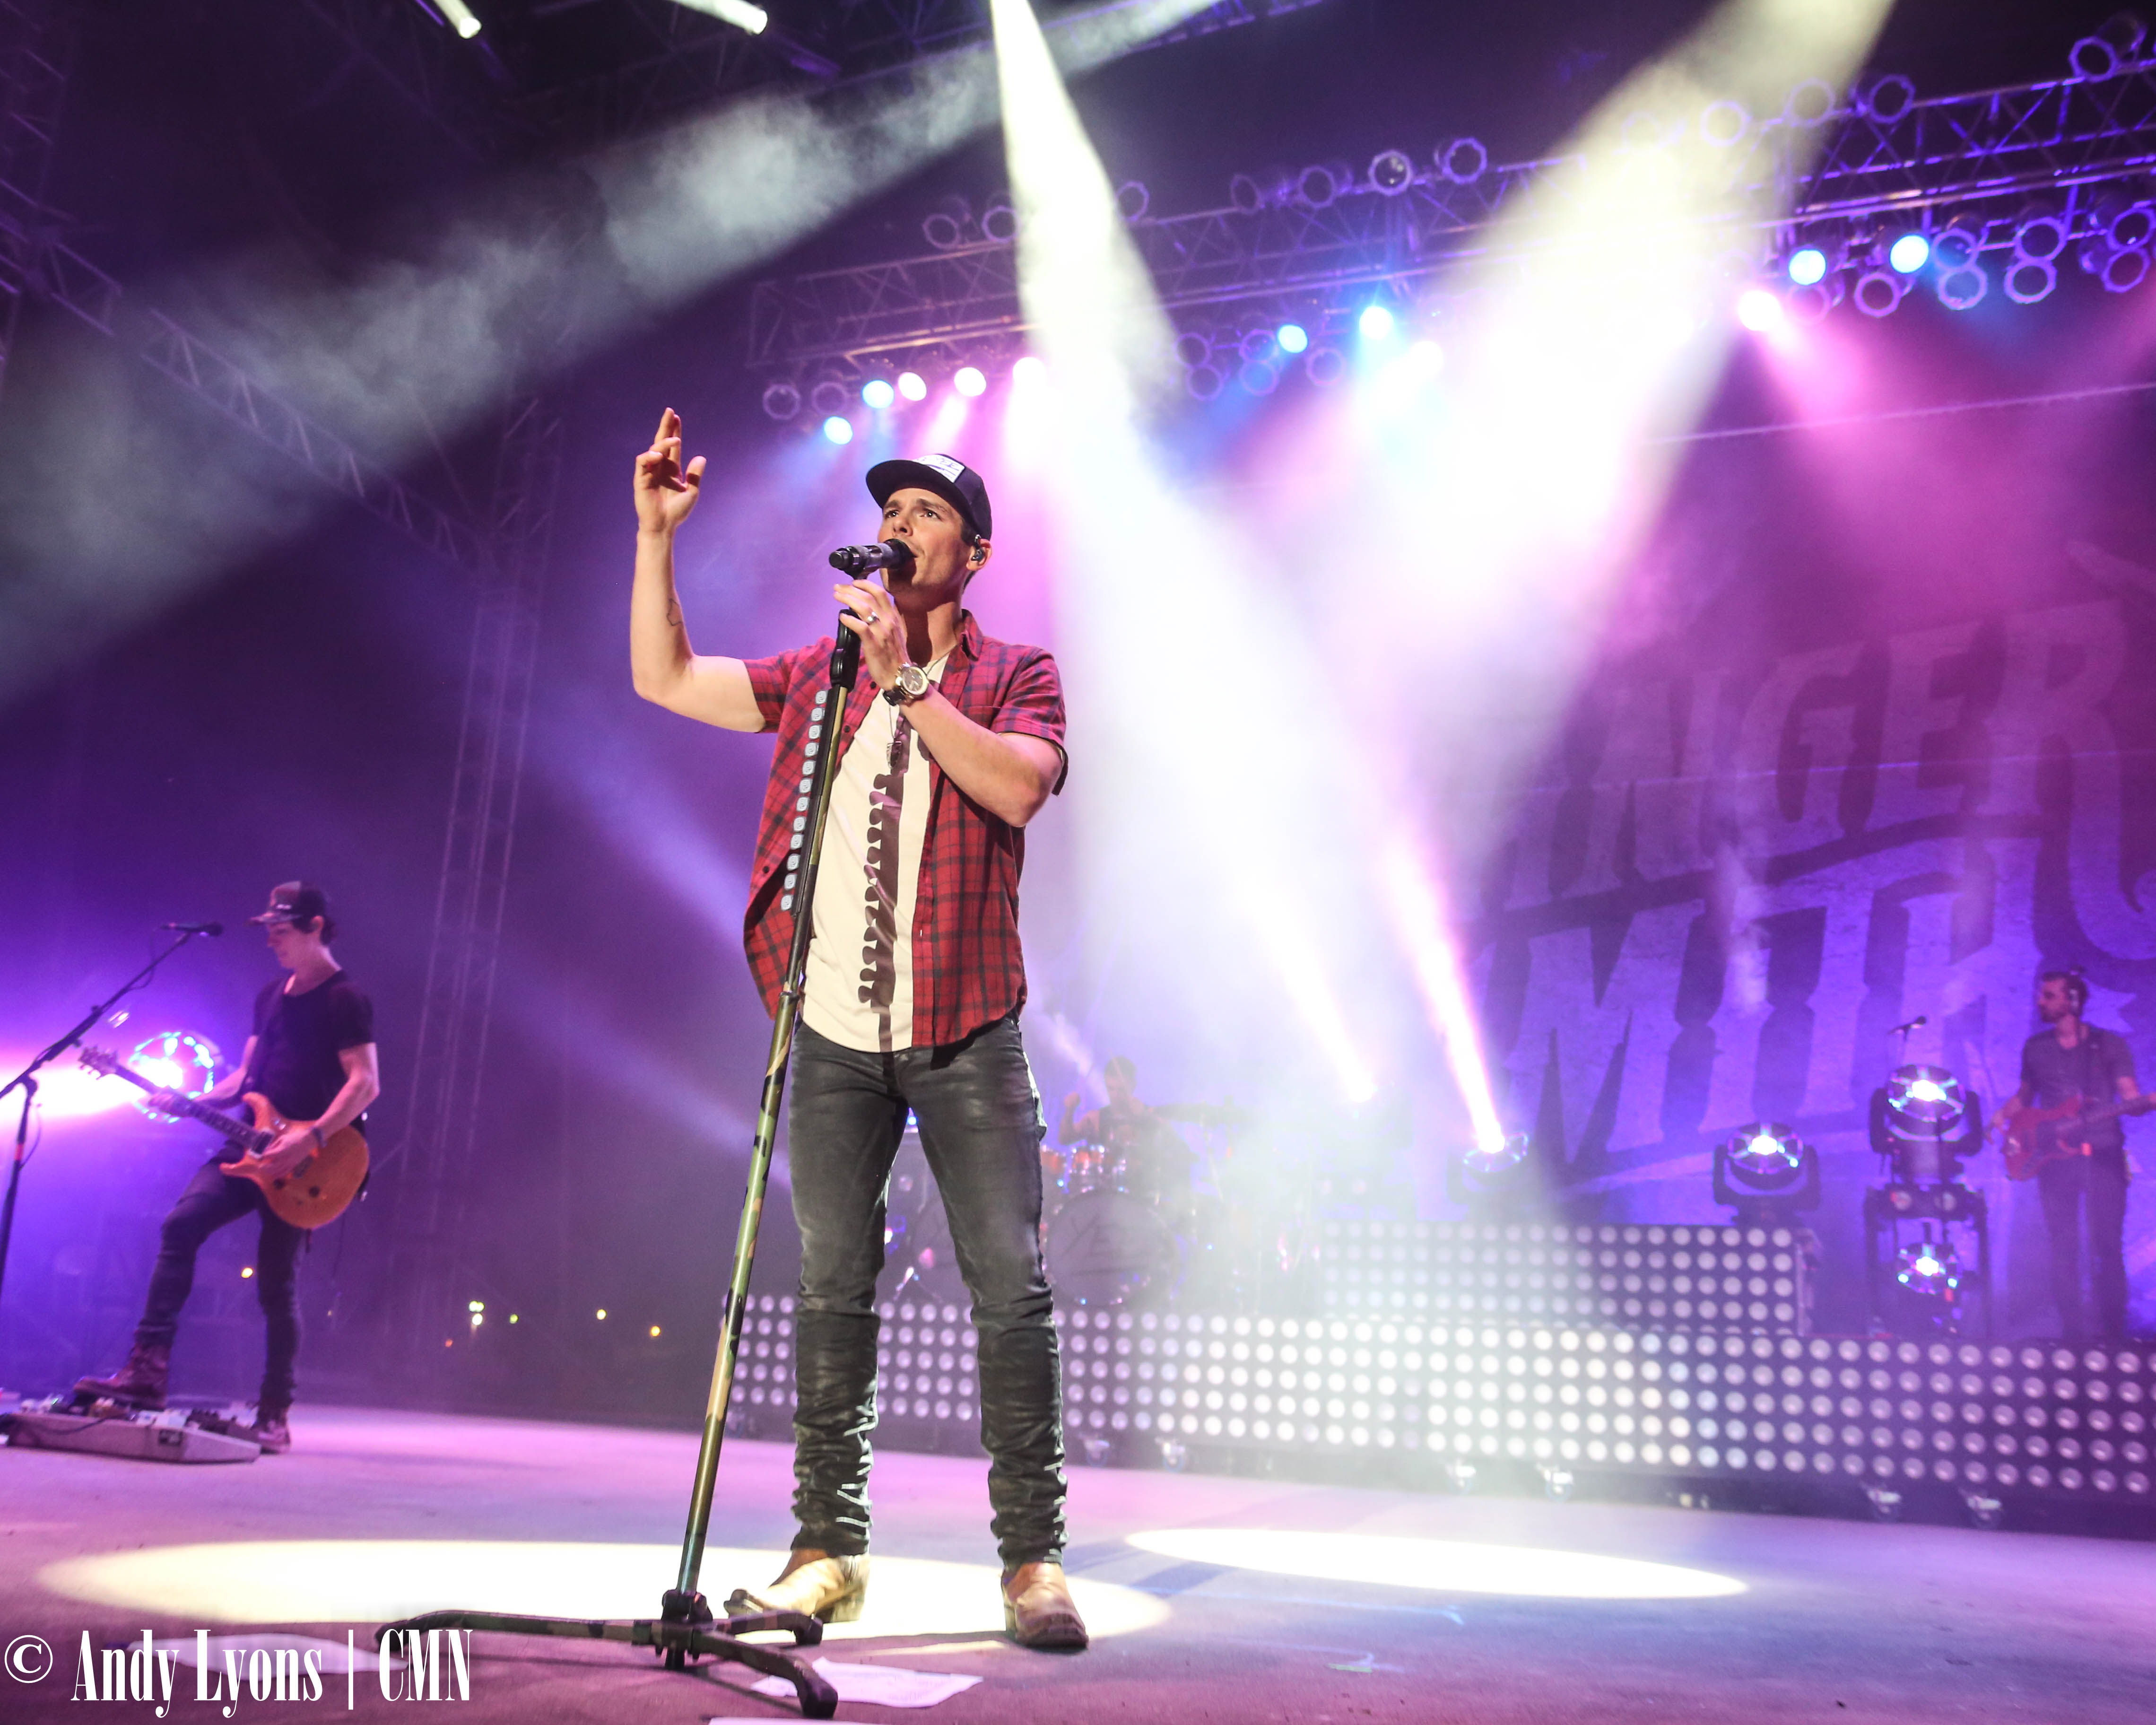 PHOTO GALLERY: Chris Lane and Granger Smith at the Missouri State Fair